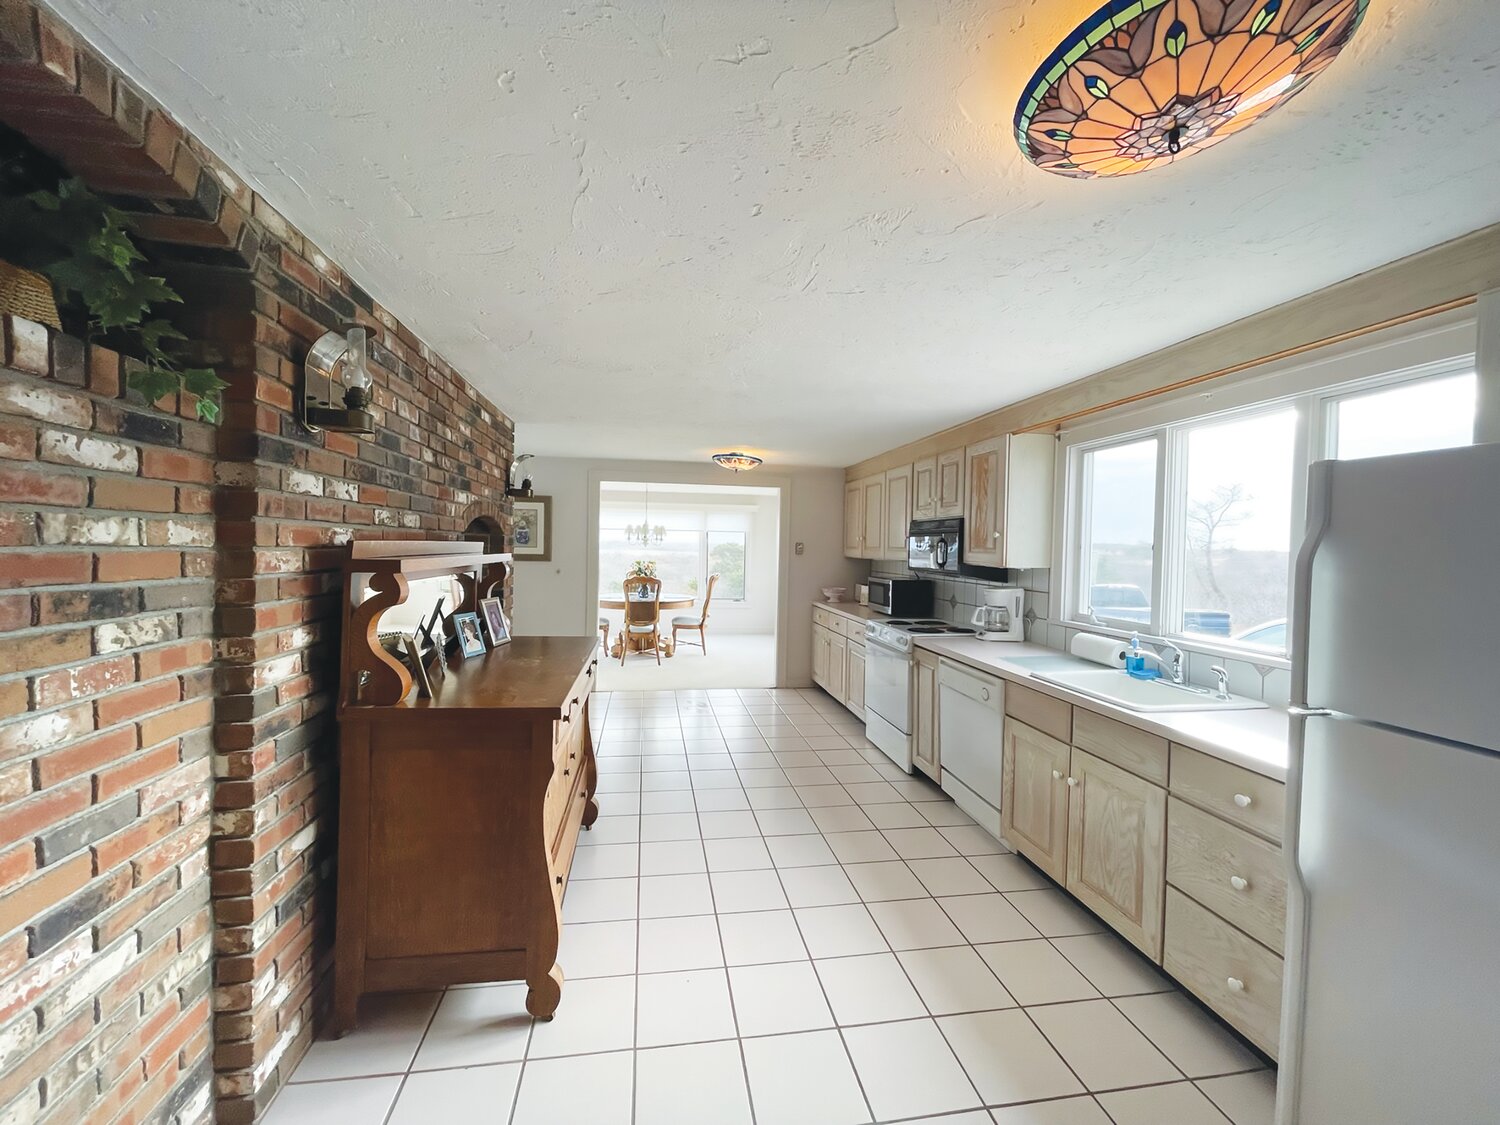 The kitchen and living room are divided by a brick fireplace. The kitchen has tiled floors and plenty of counter and cabinet space.